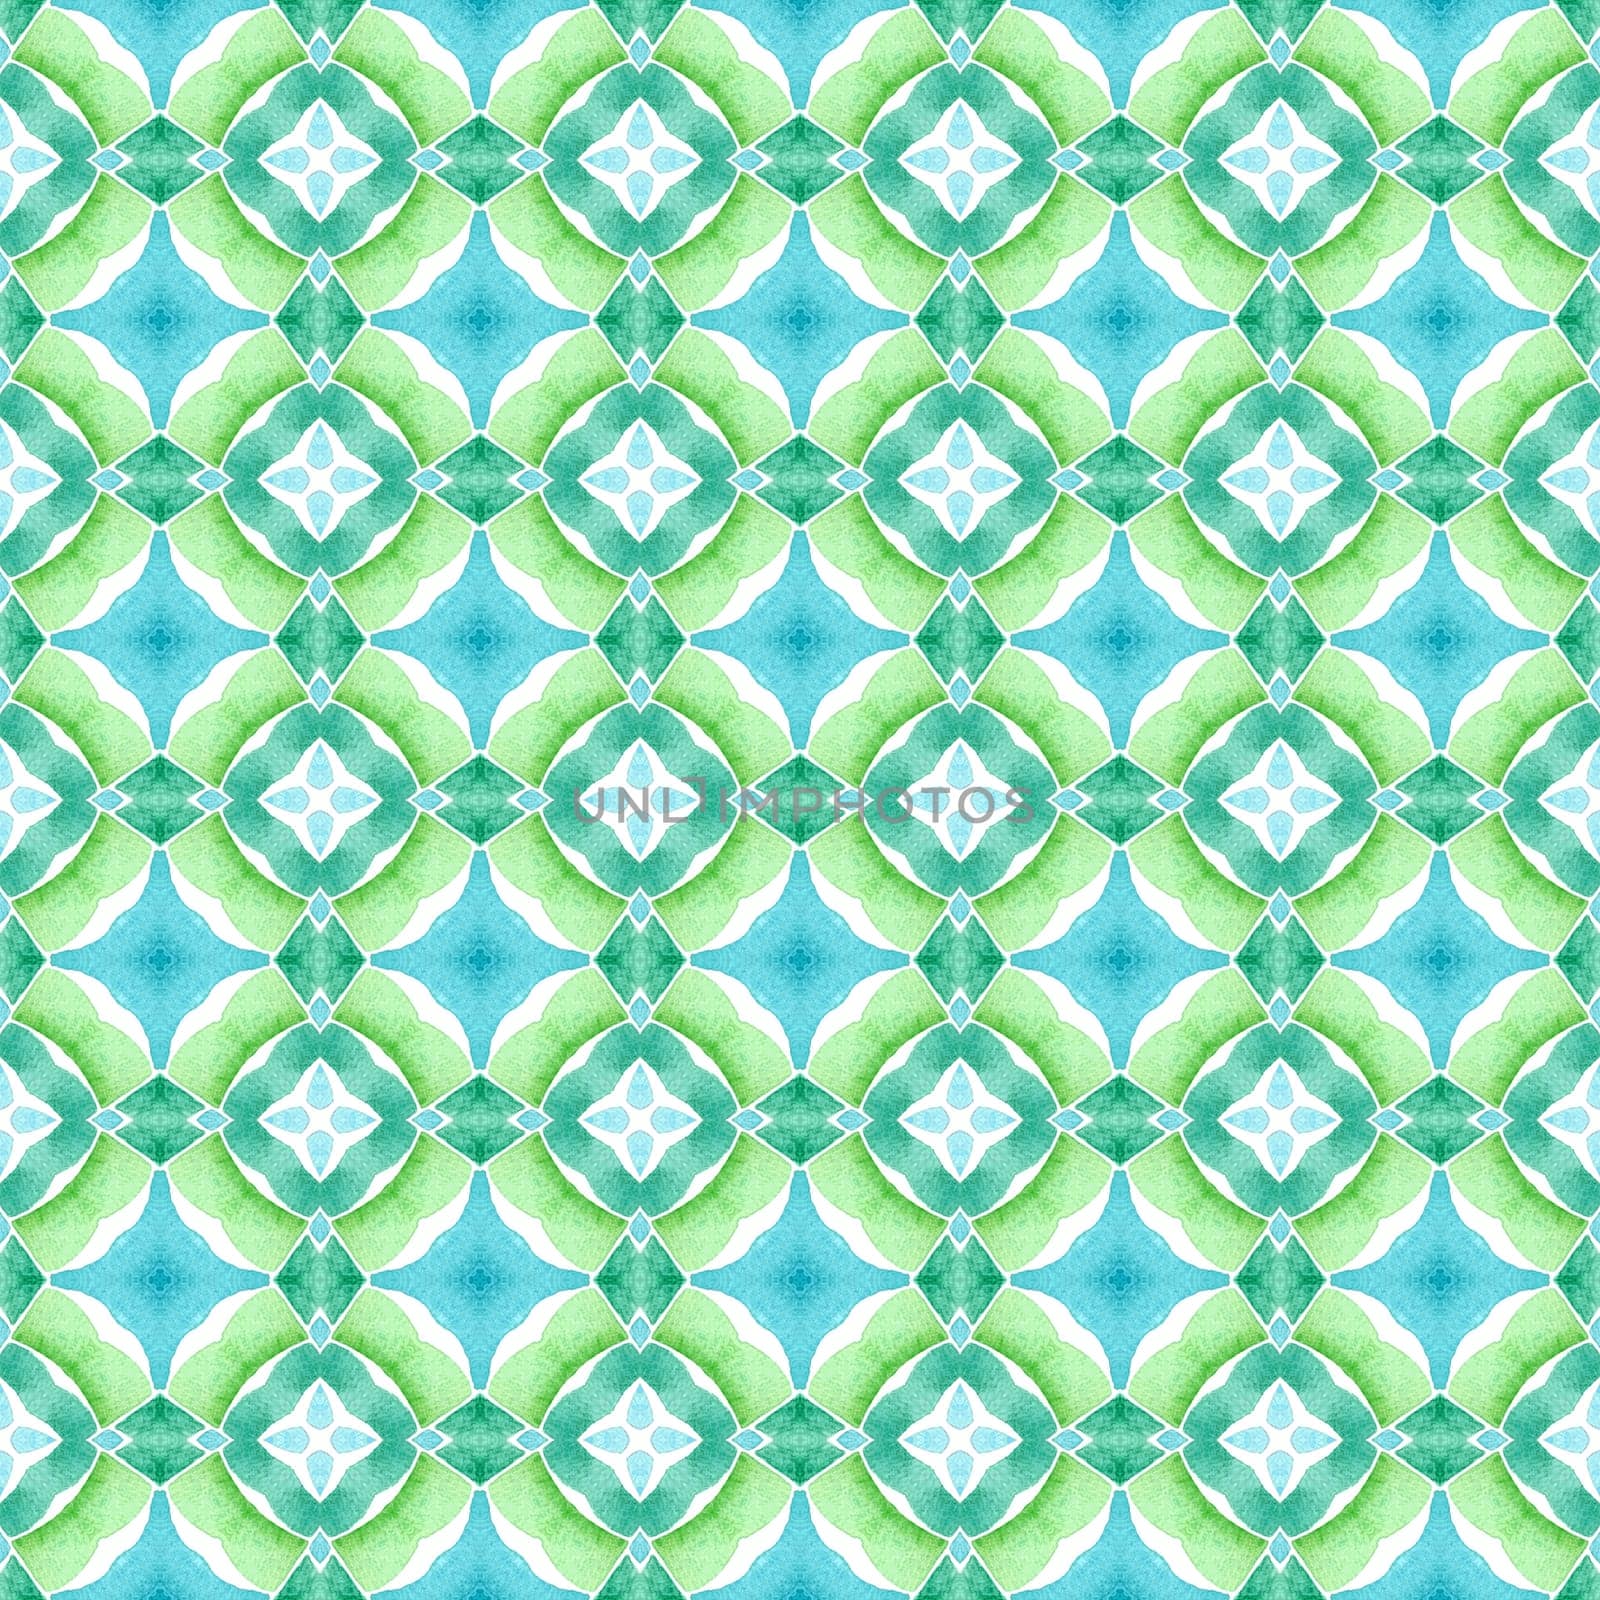 Textile ready unequaled print, swimwear fabric, wallpaper, wrapping. Green fair boho chic summer design. Ethnic hand painted pattern. Watercolor summer ethnic border pattern.